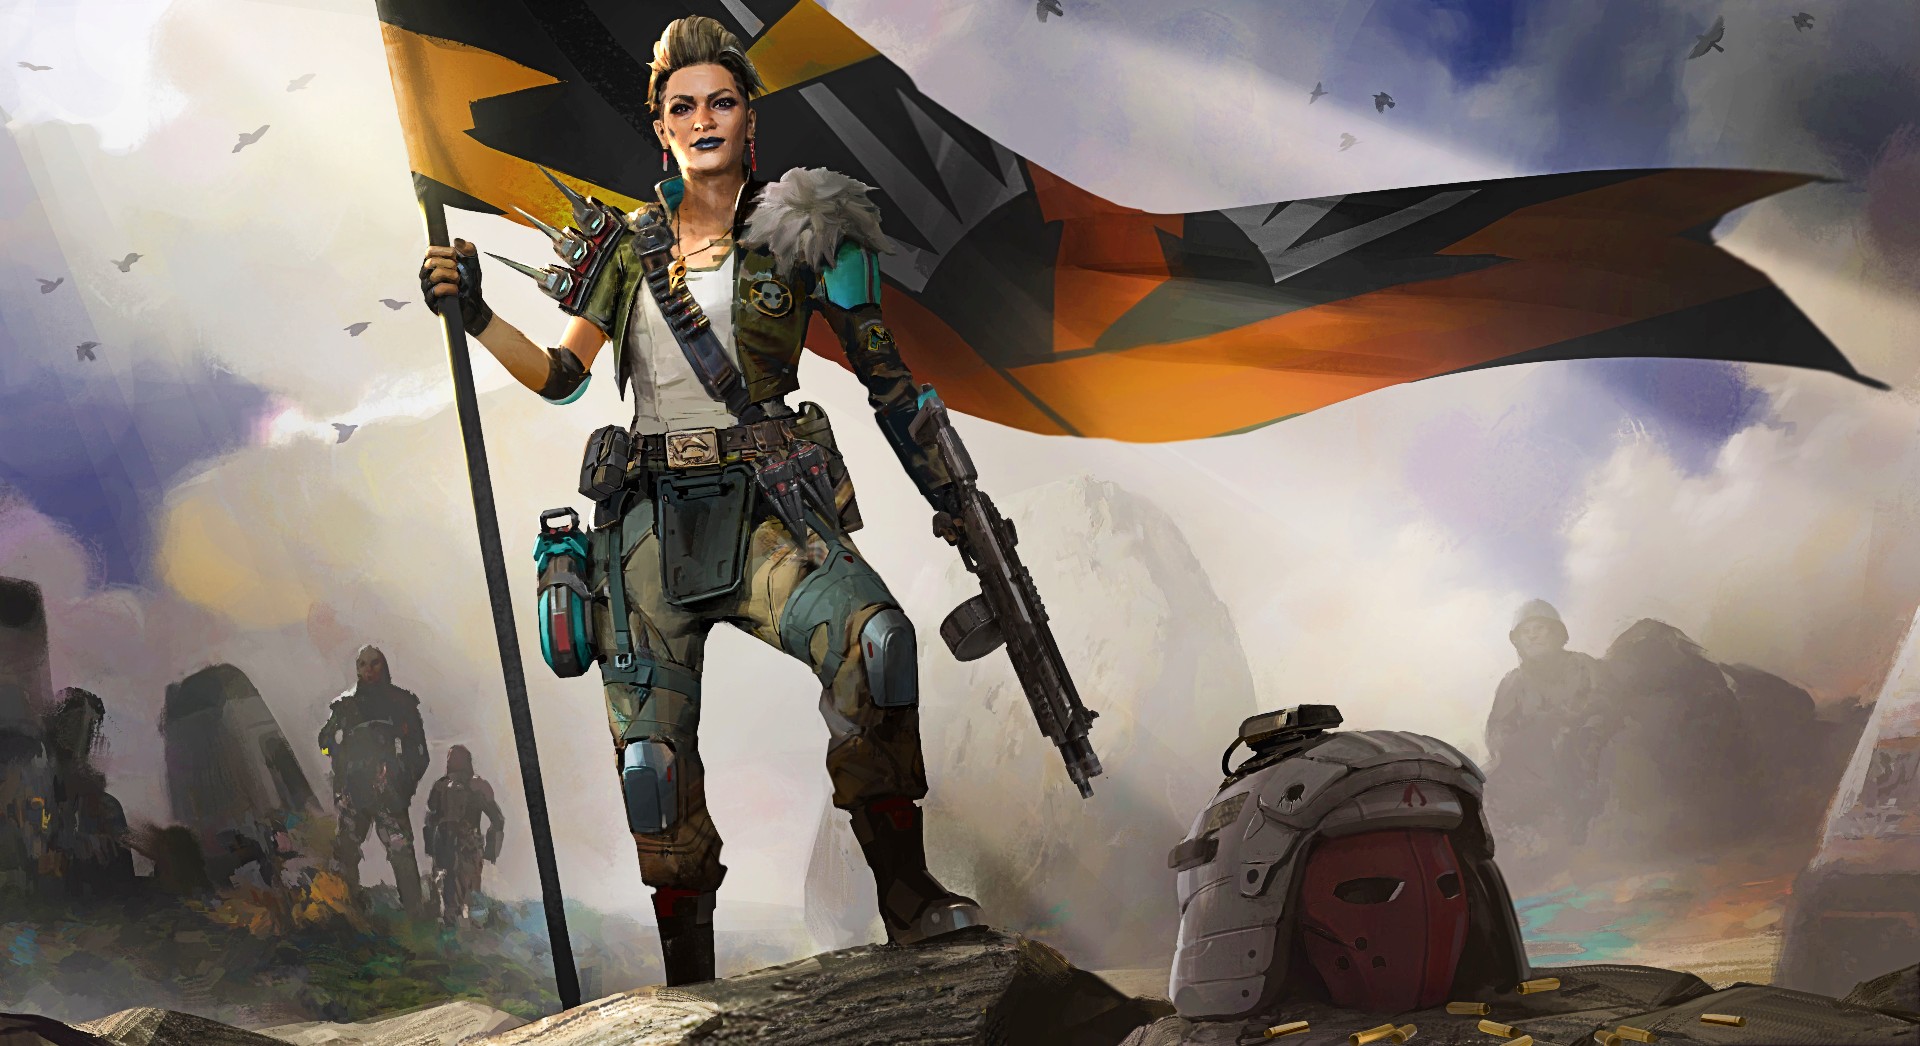 Apex Legends' Mad Maggie used to have a riot shield as part of her kit